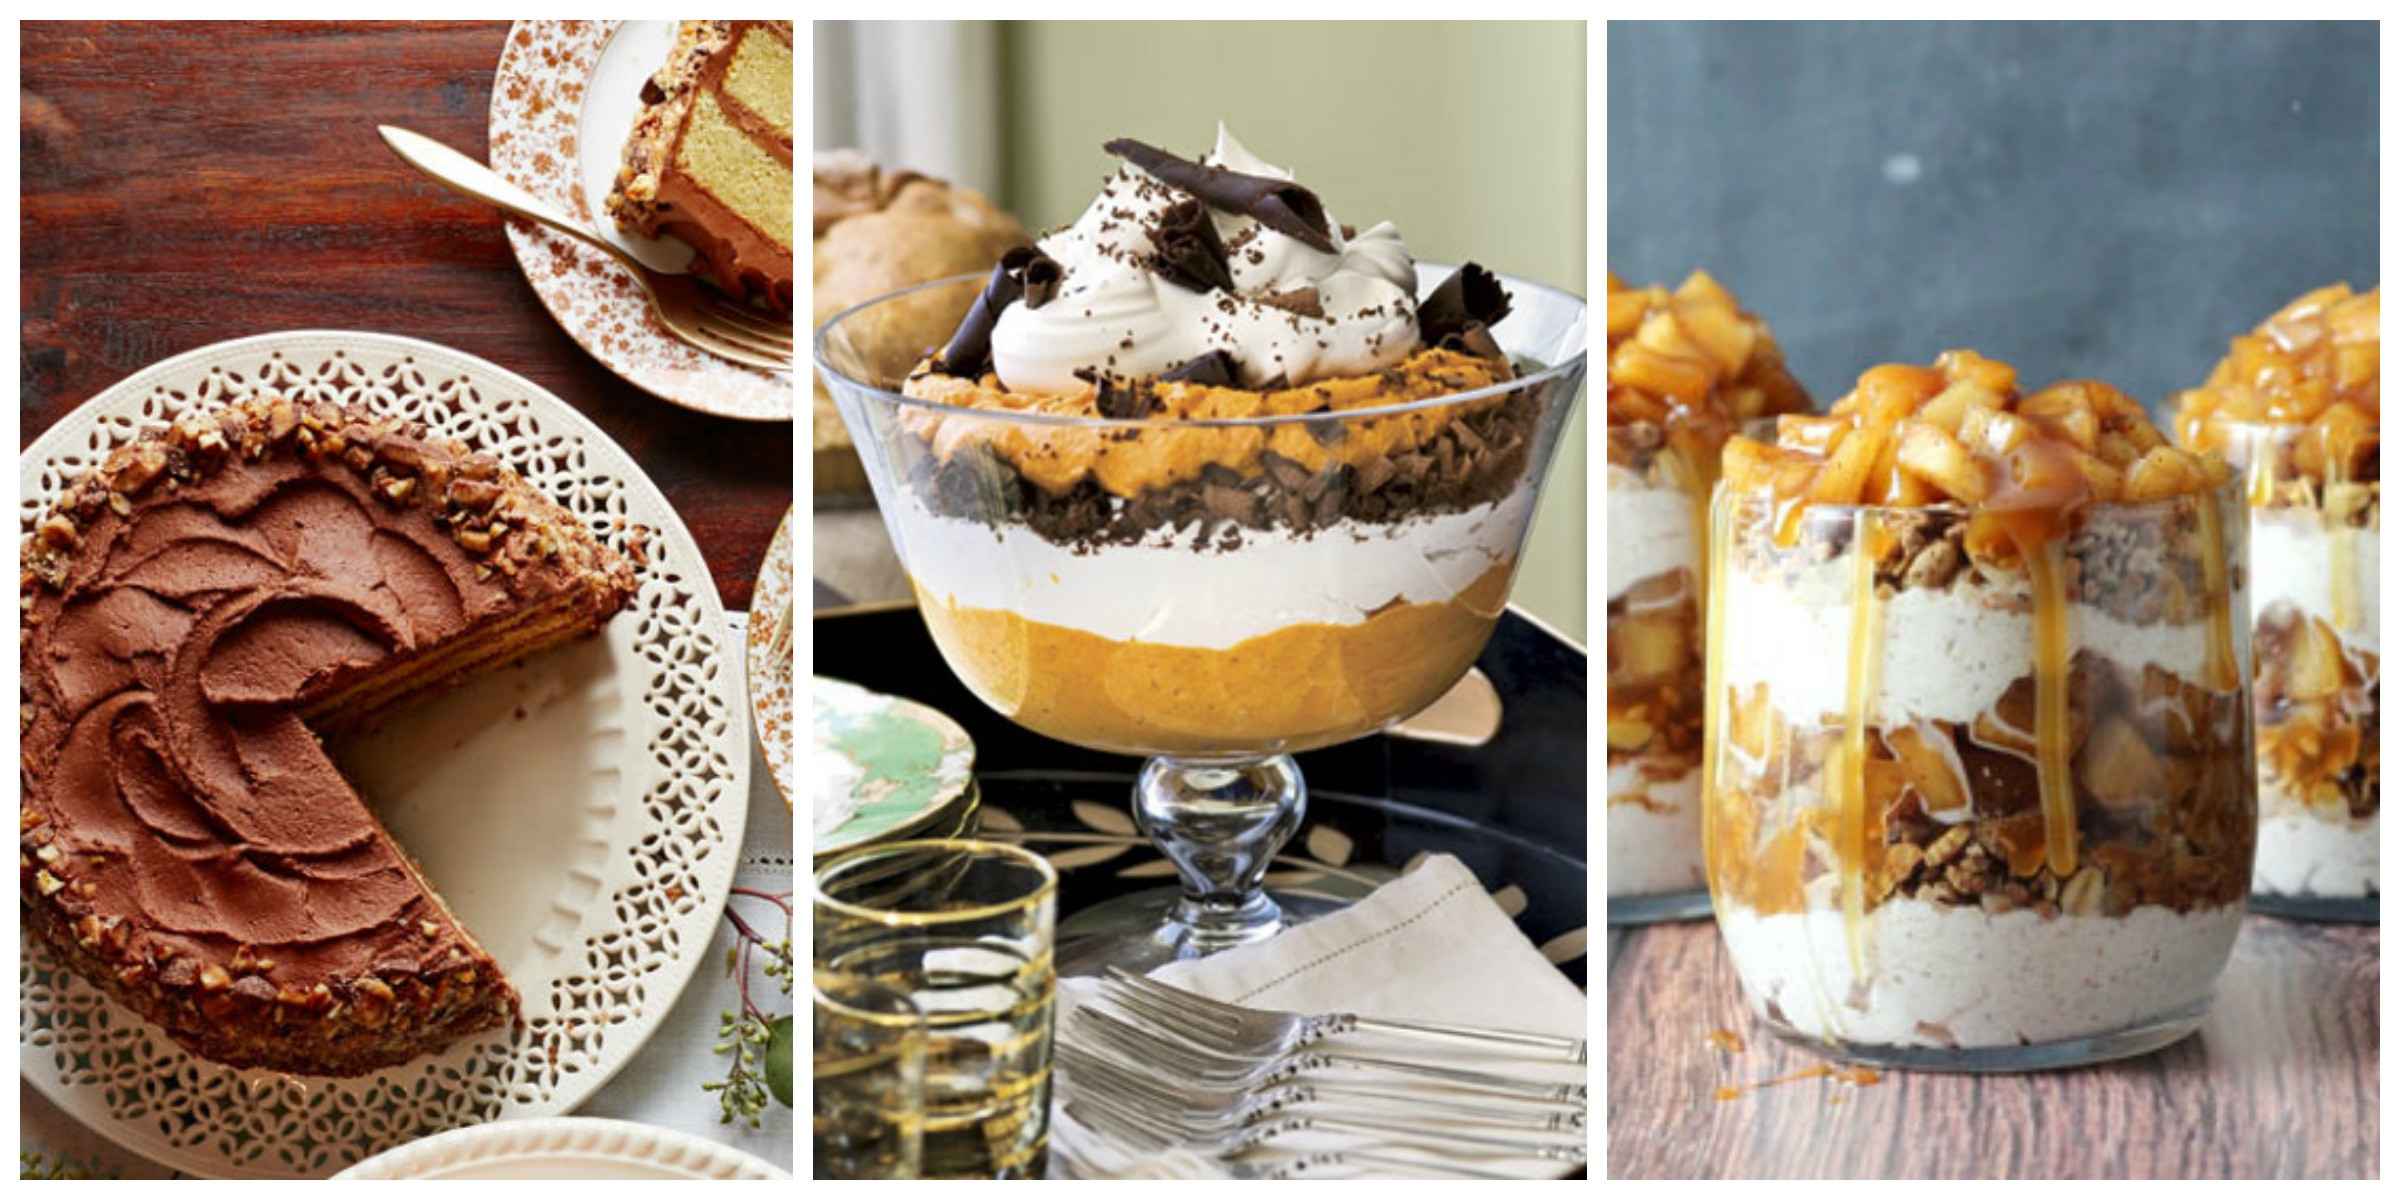 Desserts For Thanksgiving
 40 Easy Thanksgiving Desserts Recipes Best Ideas for